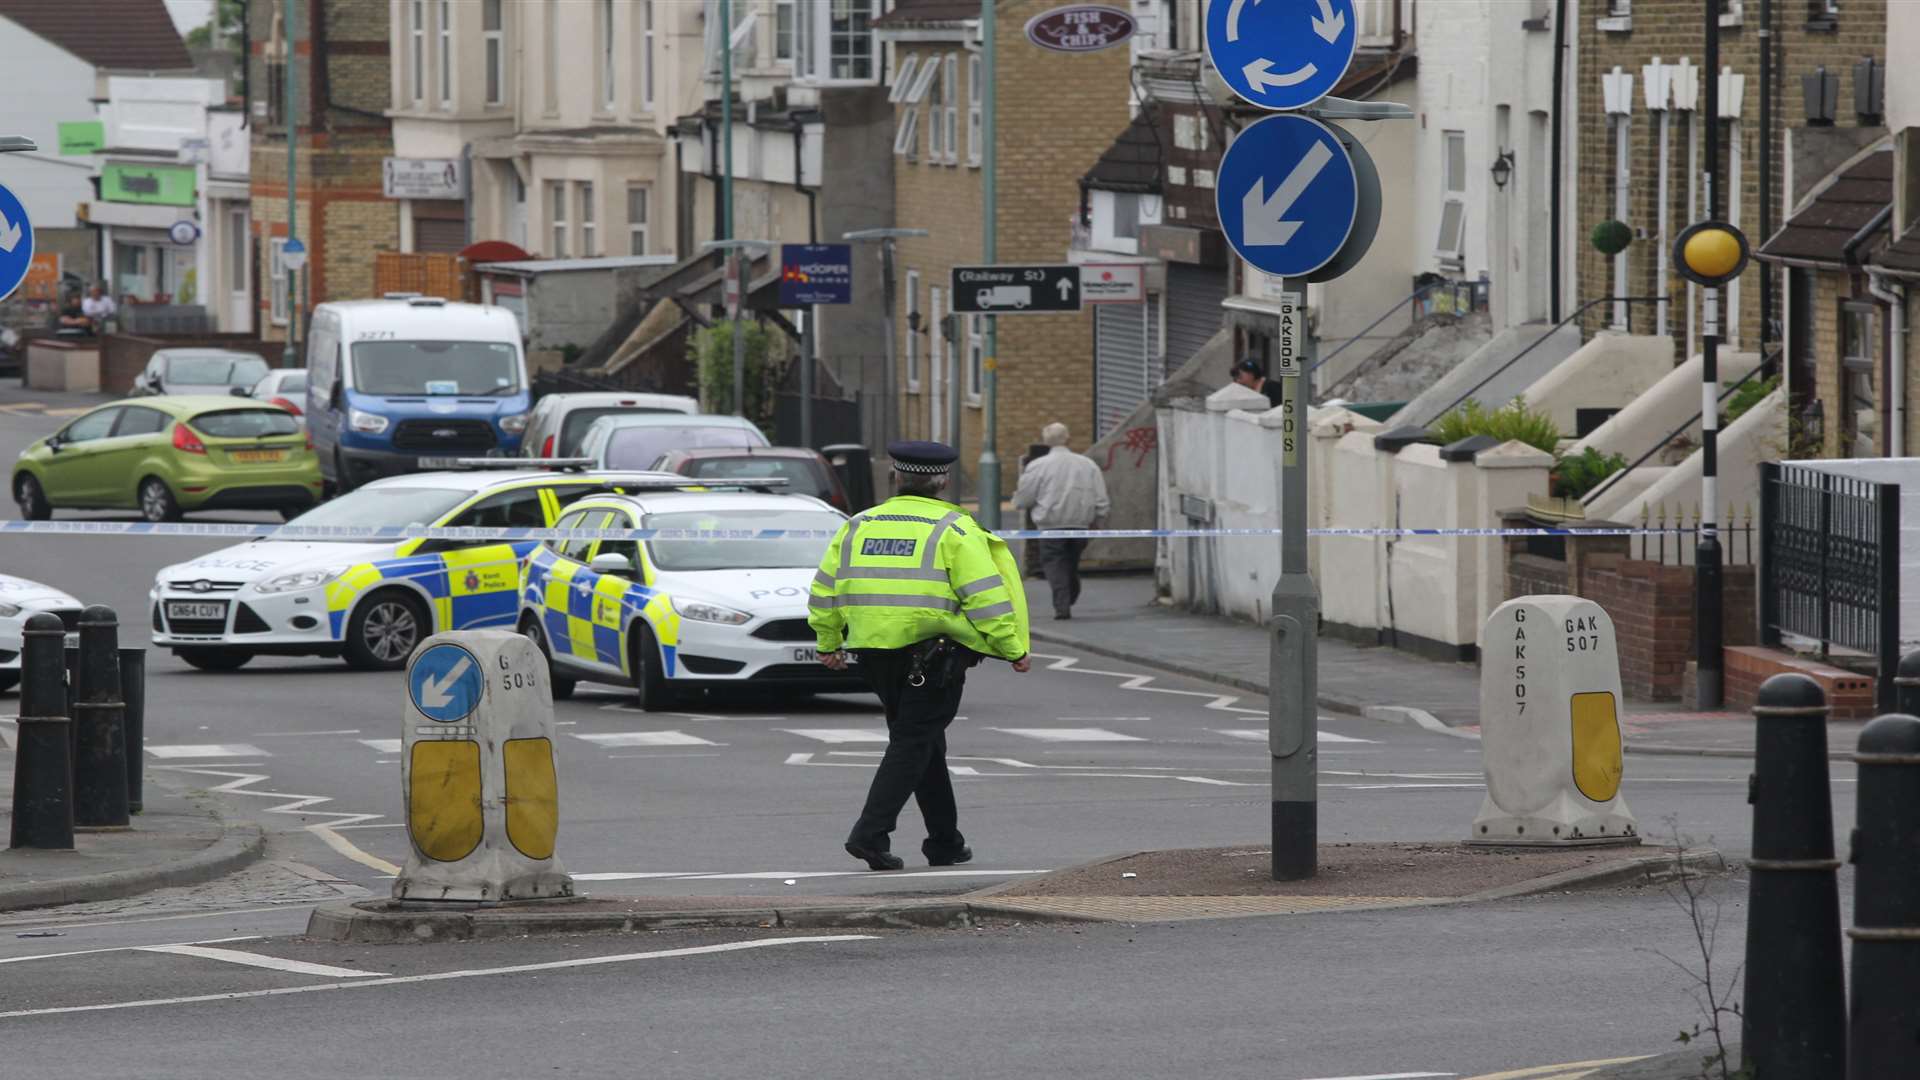 Police cordon off the area at Livingstone Circus, Gillingham. Picture by John Westhrop.